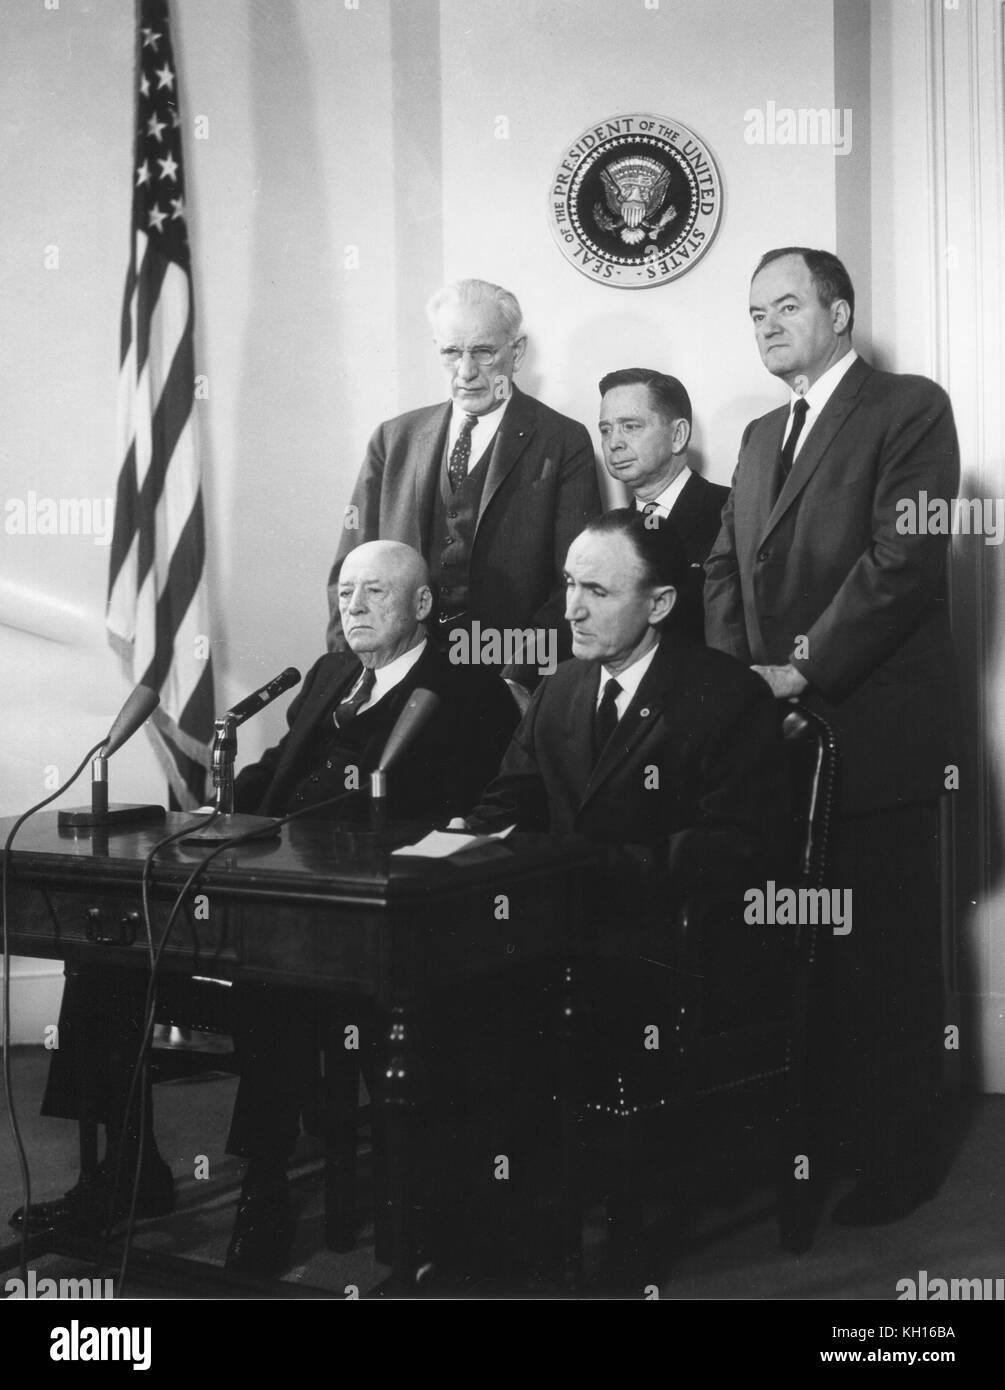 Democratic Leaders  of the 87th Congress pose under the Presidential Seal; seated l-r: Sam Rayburn, Speaker of the House; Mike Mansfield, Senate Majority Leader; standing l-r: John W McCormack, House Majority Leader; Carl B Albert, House Majority Whip; and Hubert Humphrey, Senate Majority Whip, Washington, DC, March 21, 1961. Photo by Abbie Rowe Stock Photo